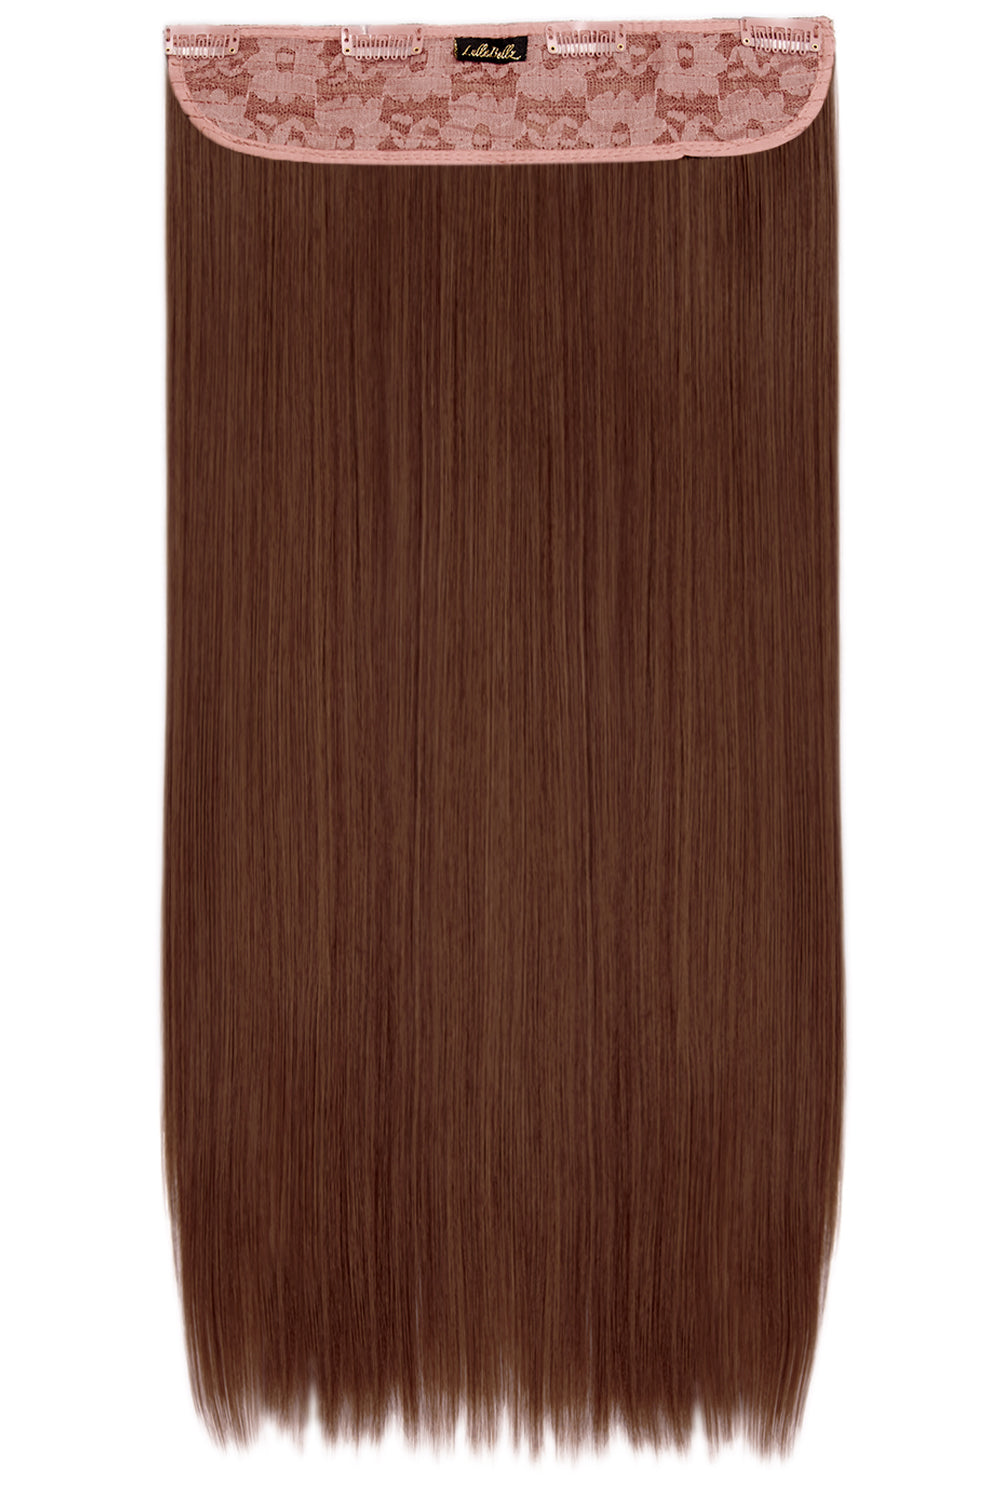 Thick 24" 1 Piece Straight Clip In Hair Extensions - Auburn